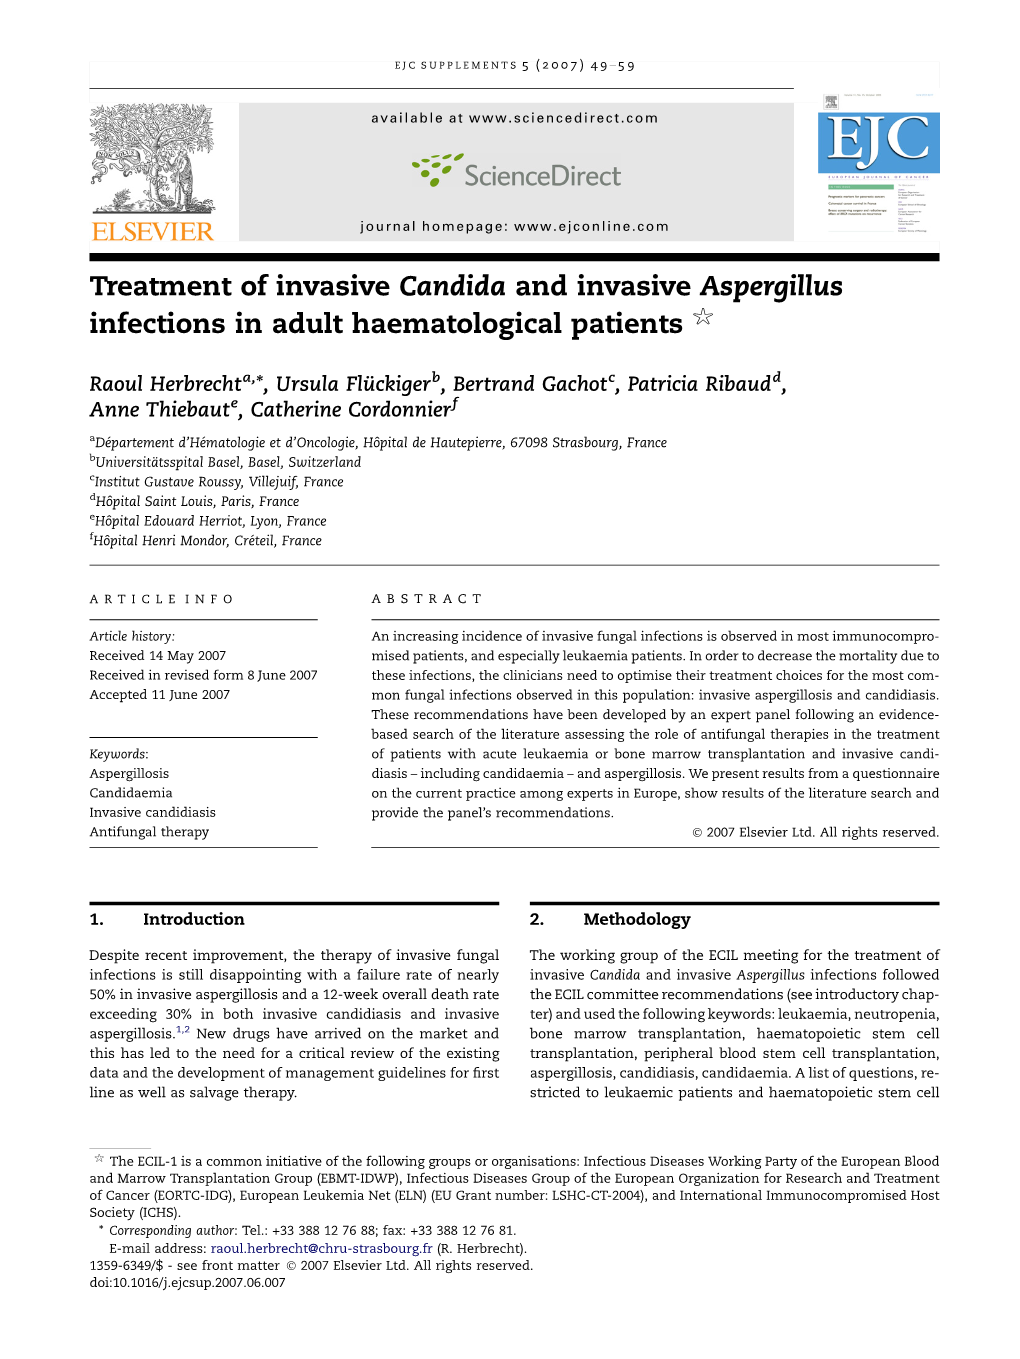 Treatment of Invasive Candida and Invasive Aspergillus Infections In